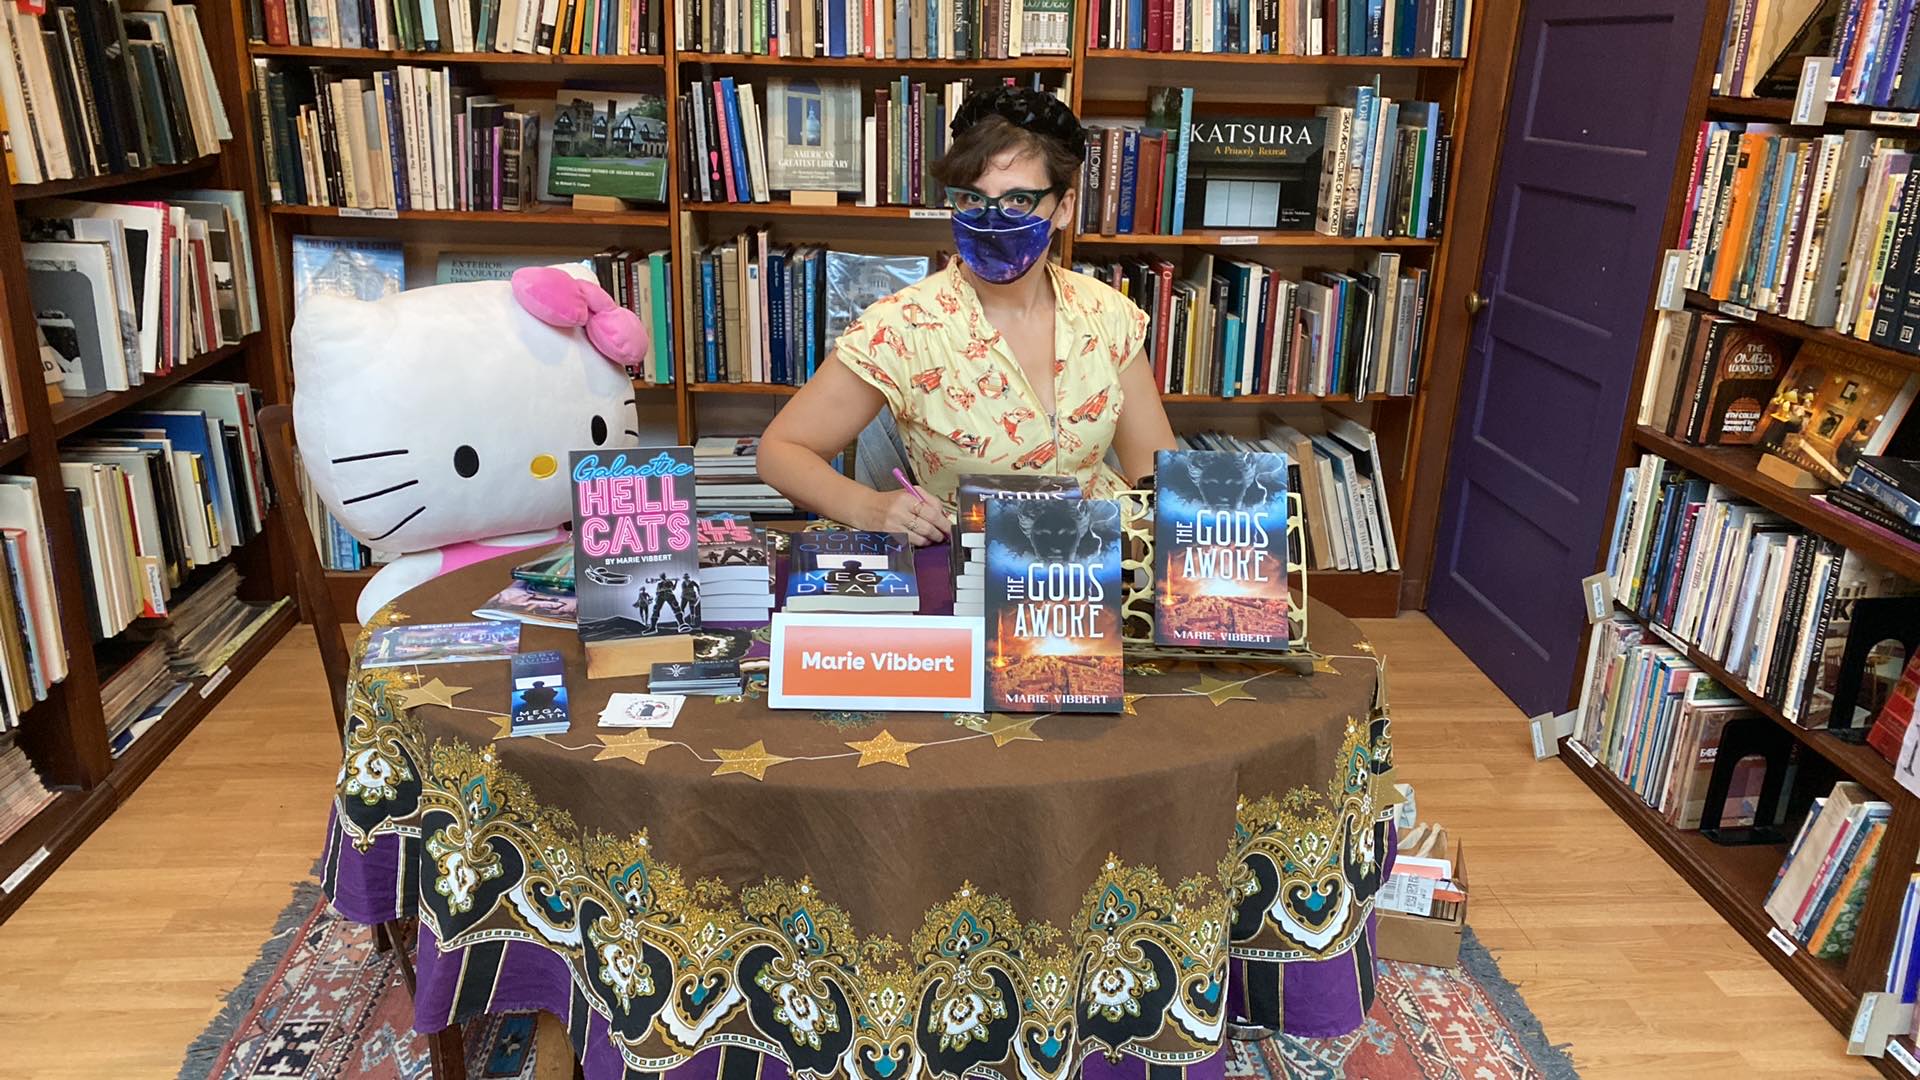 Marie sits at a signing table in a bookstore with a giant hello kitty next to her